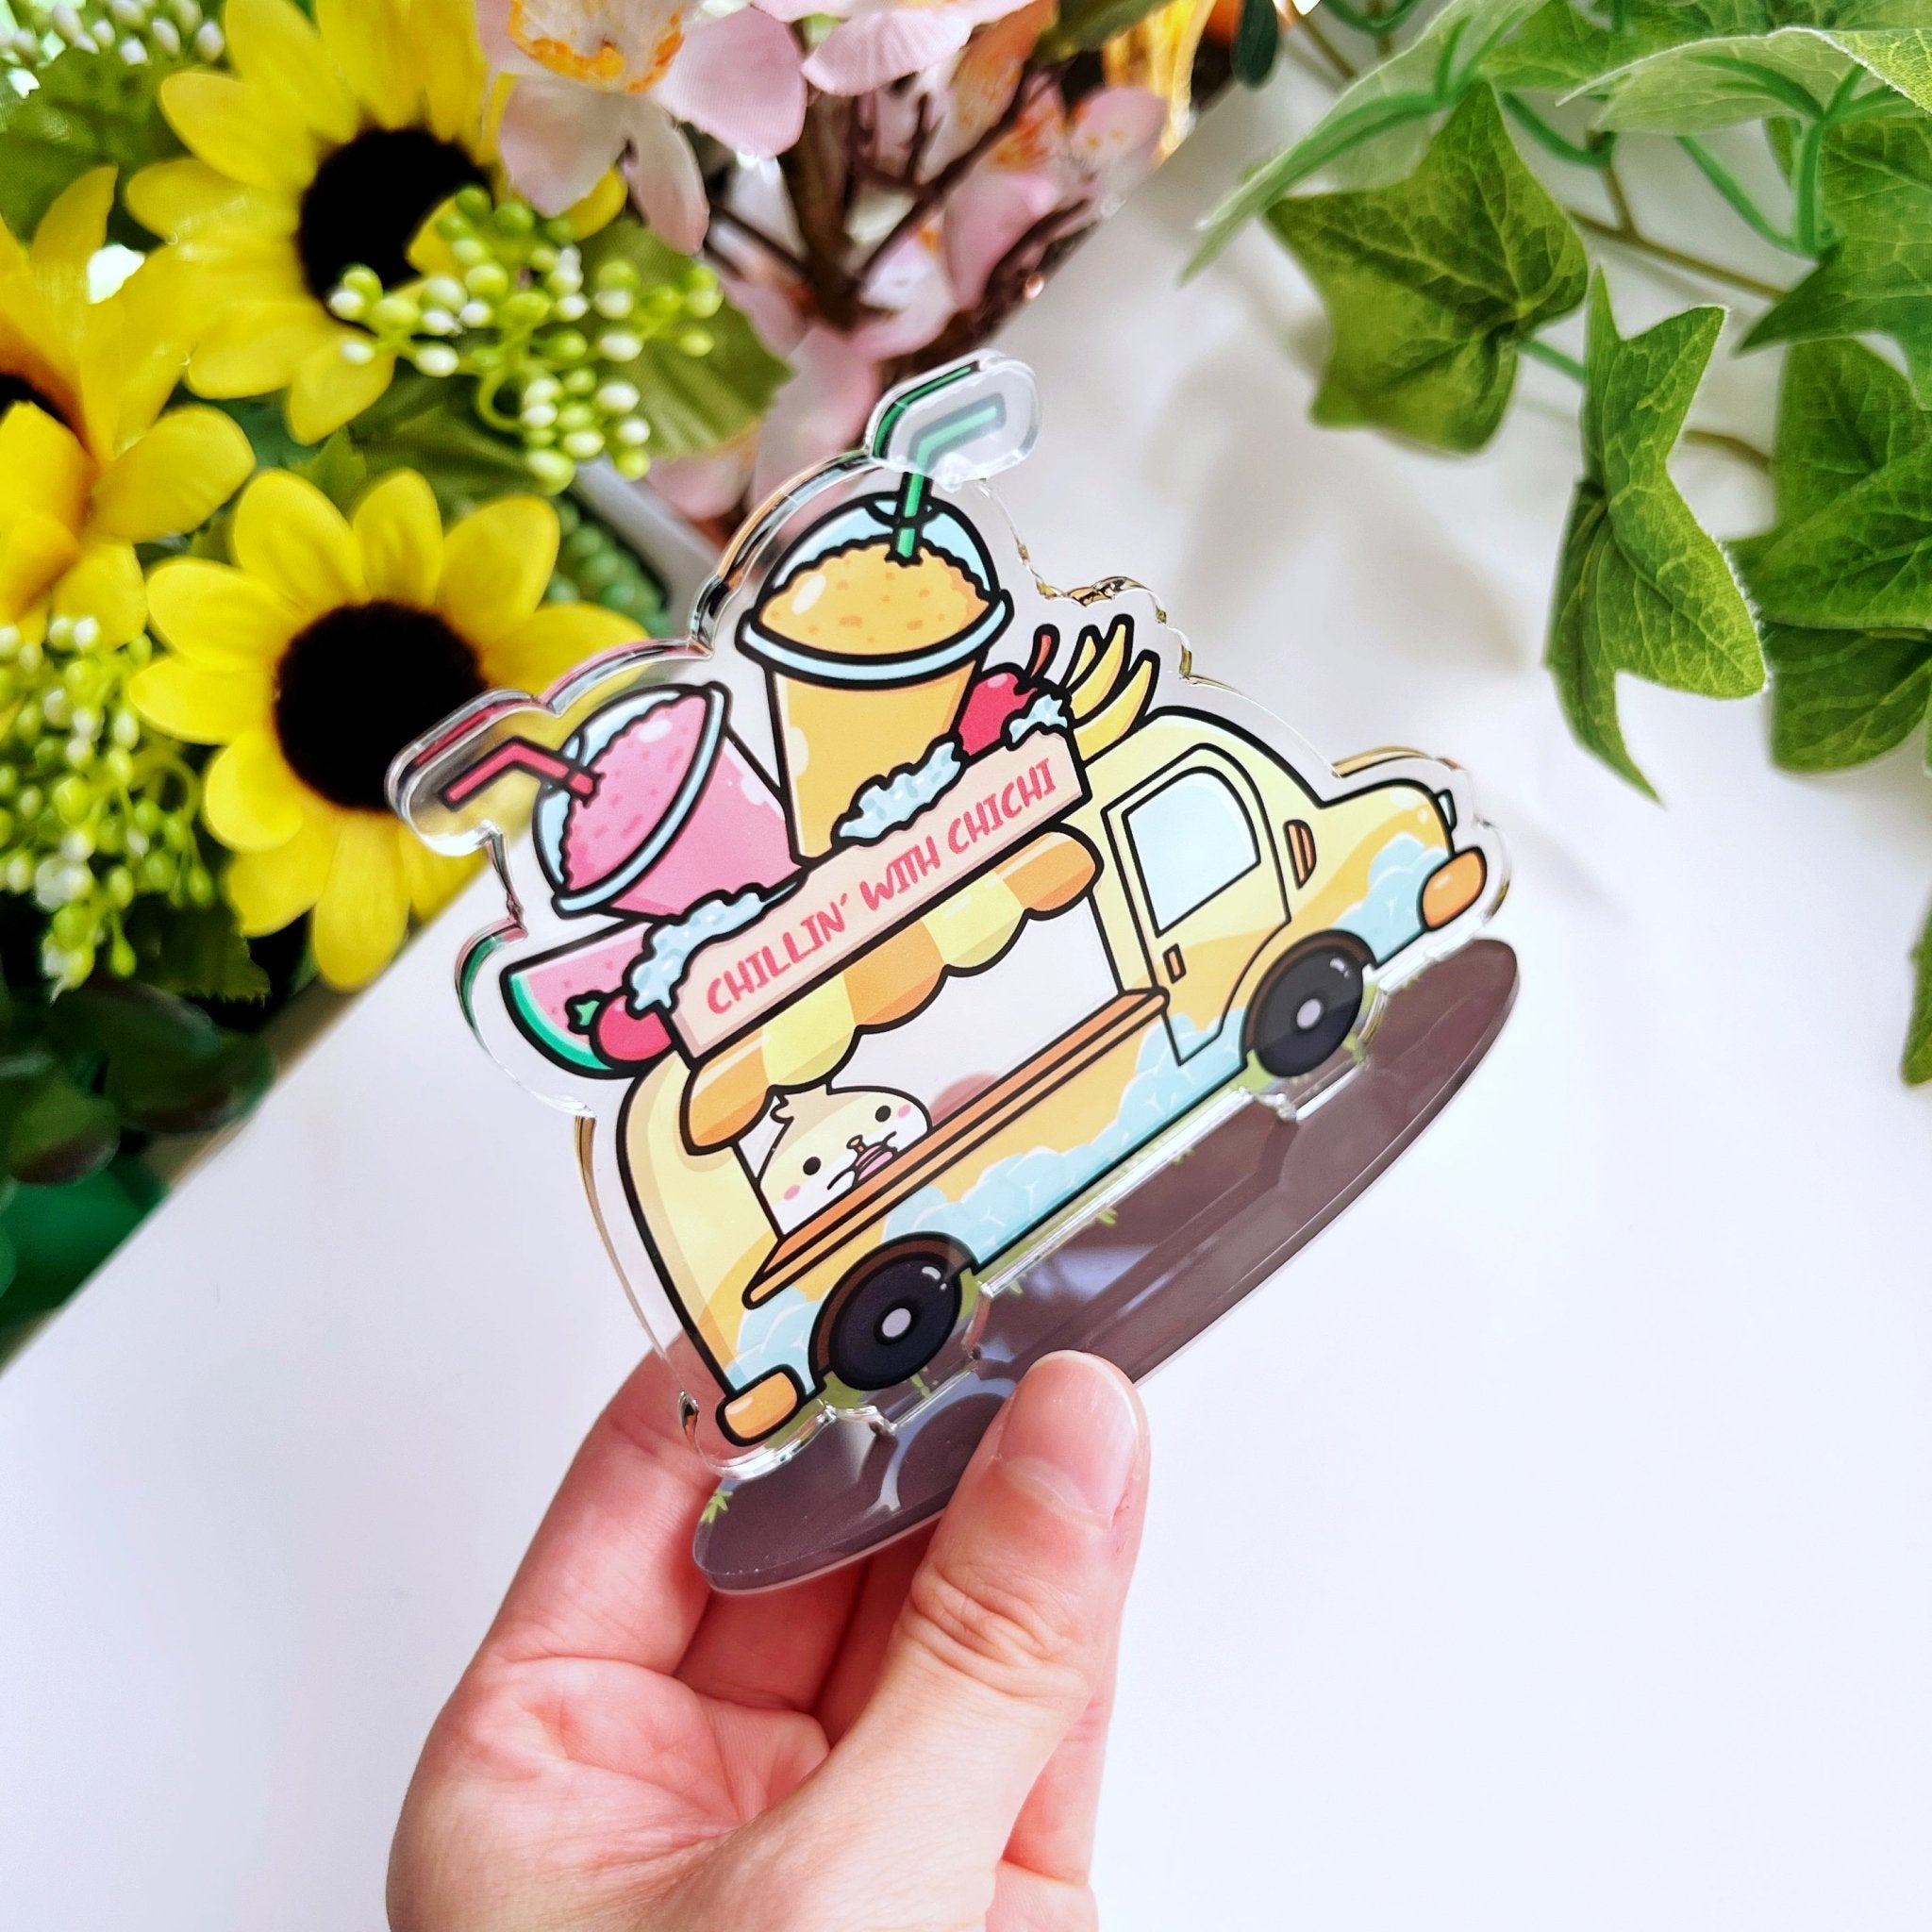 Acrylic Note Holder - Chichi's Smoothie Truck - SumLilThings